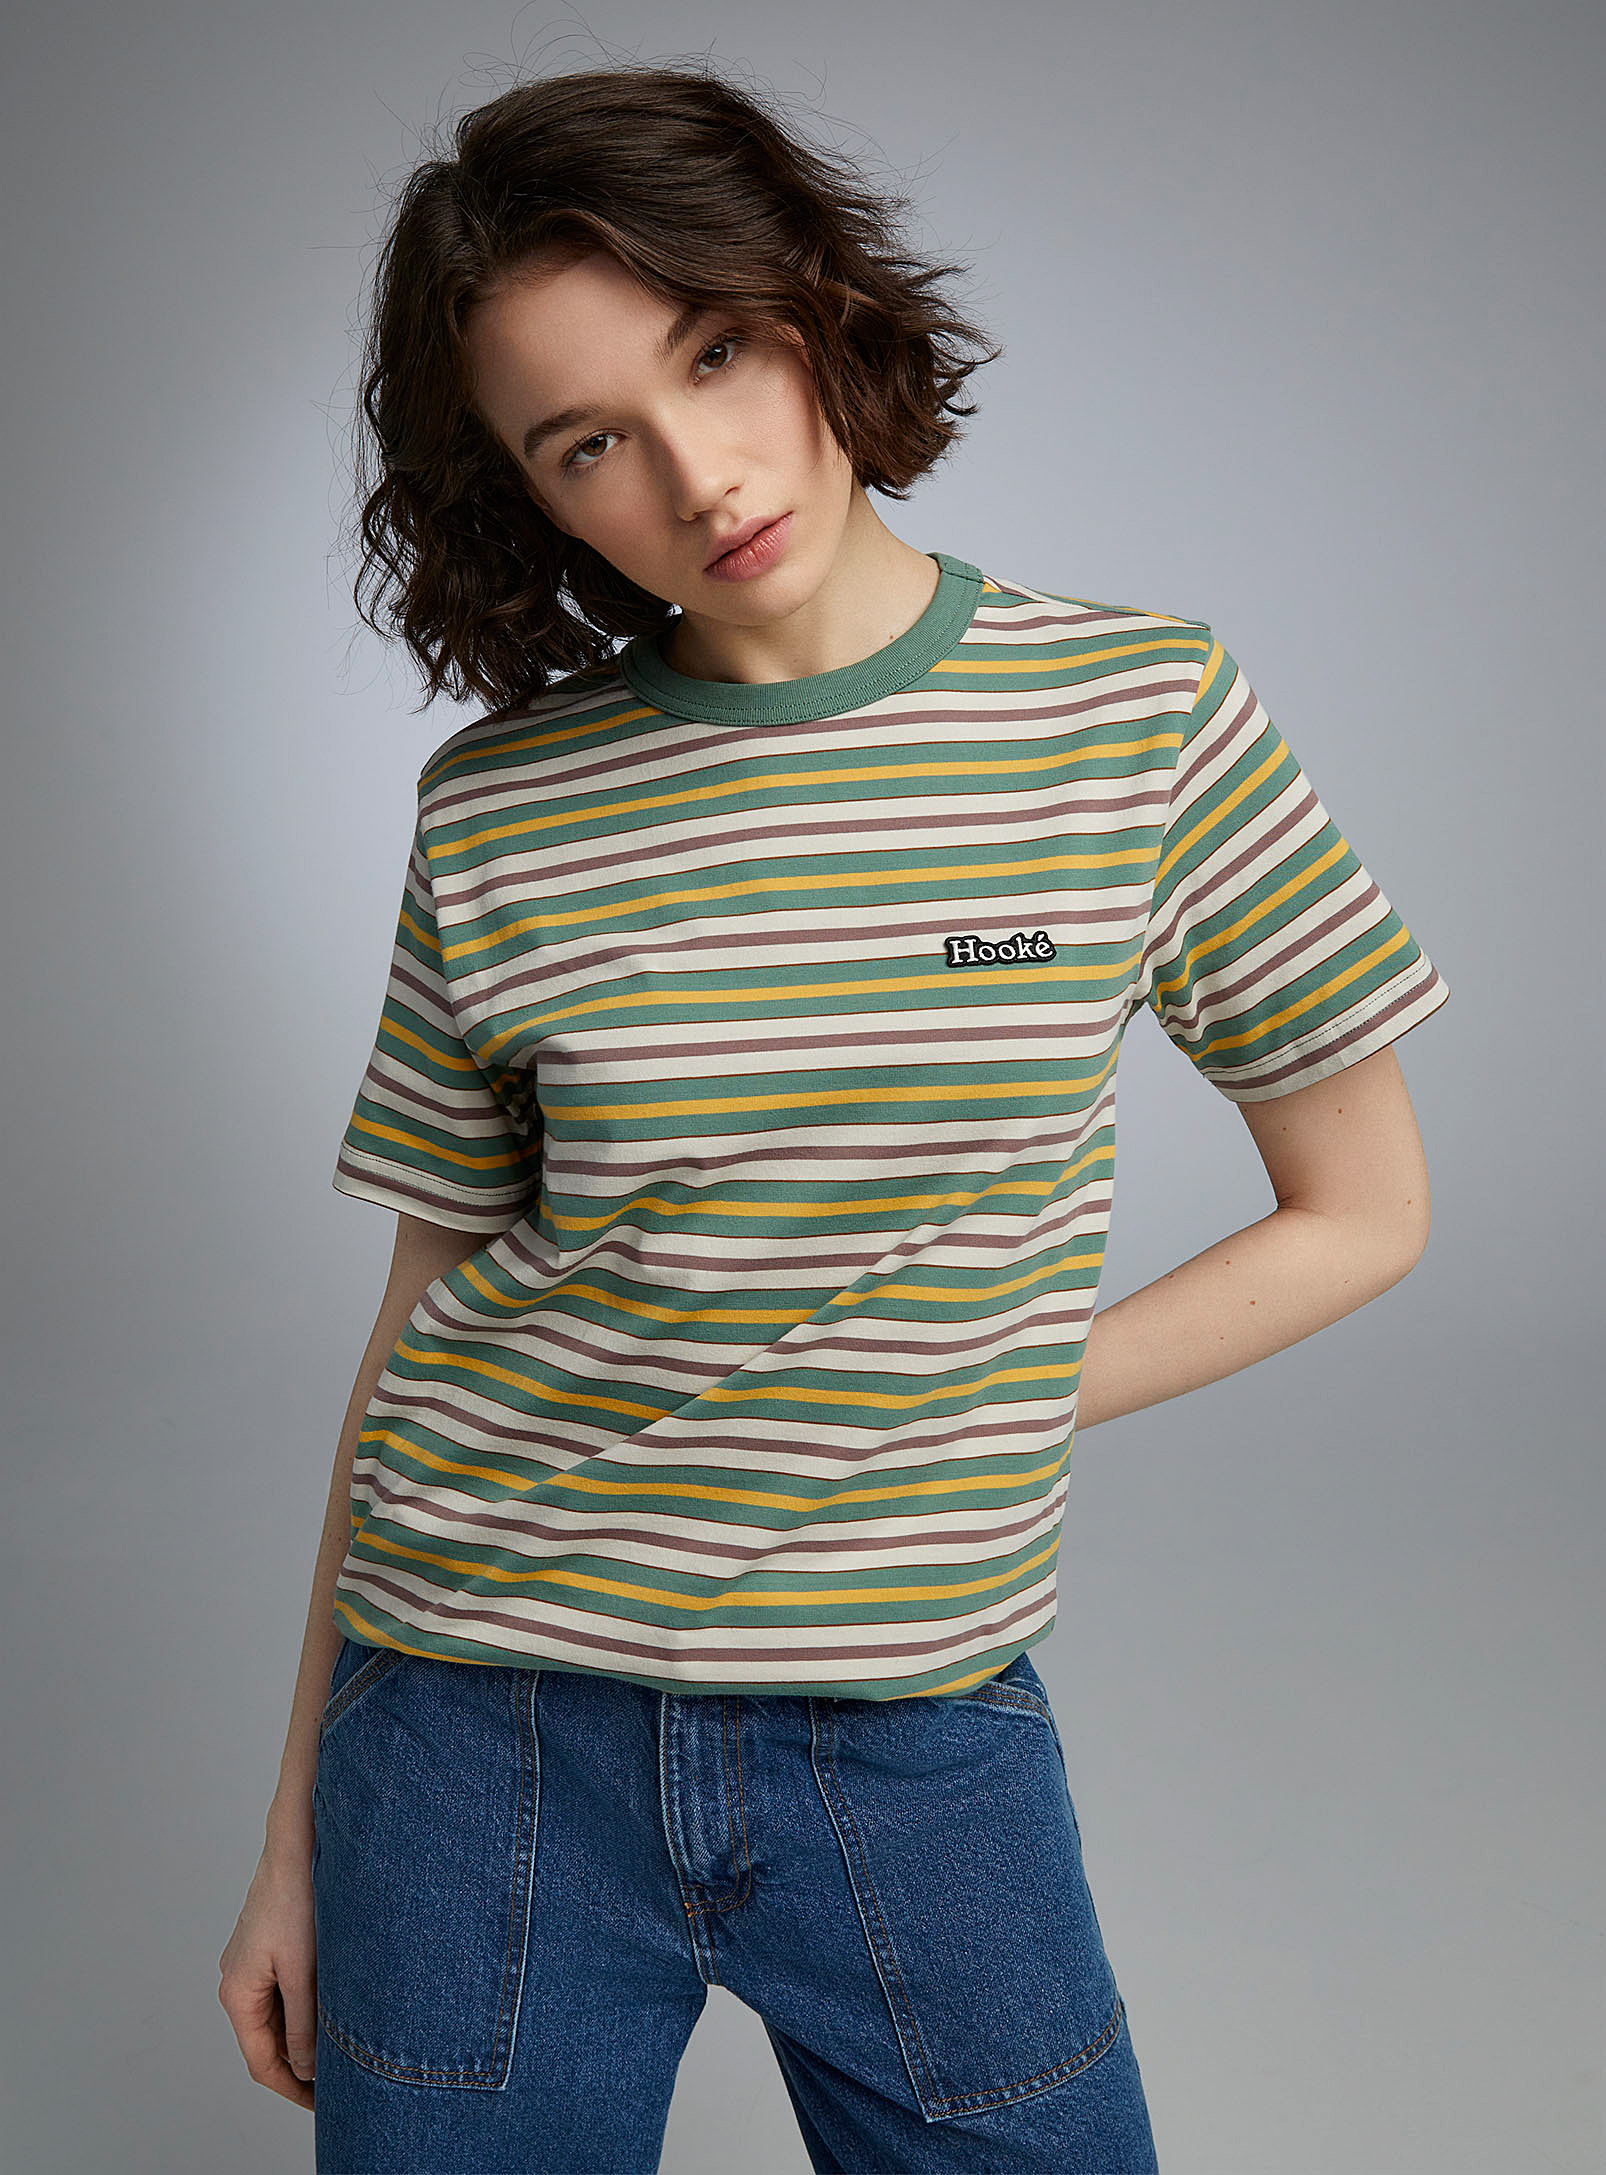 Hooké Fly Fishing Striped T-shirt In Assorted